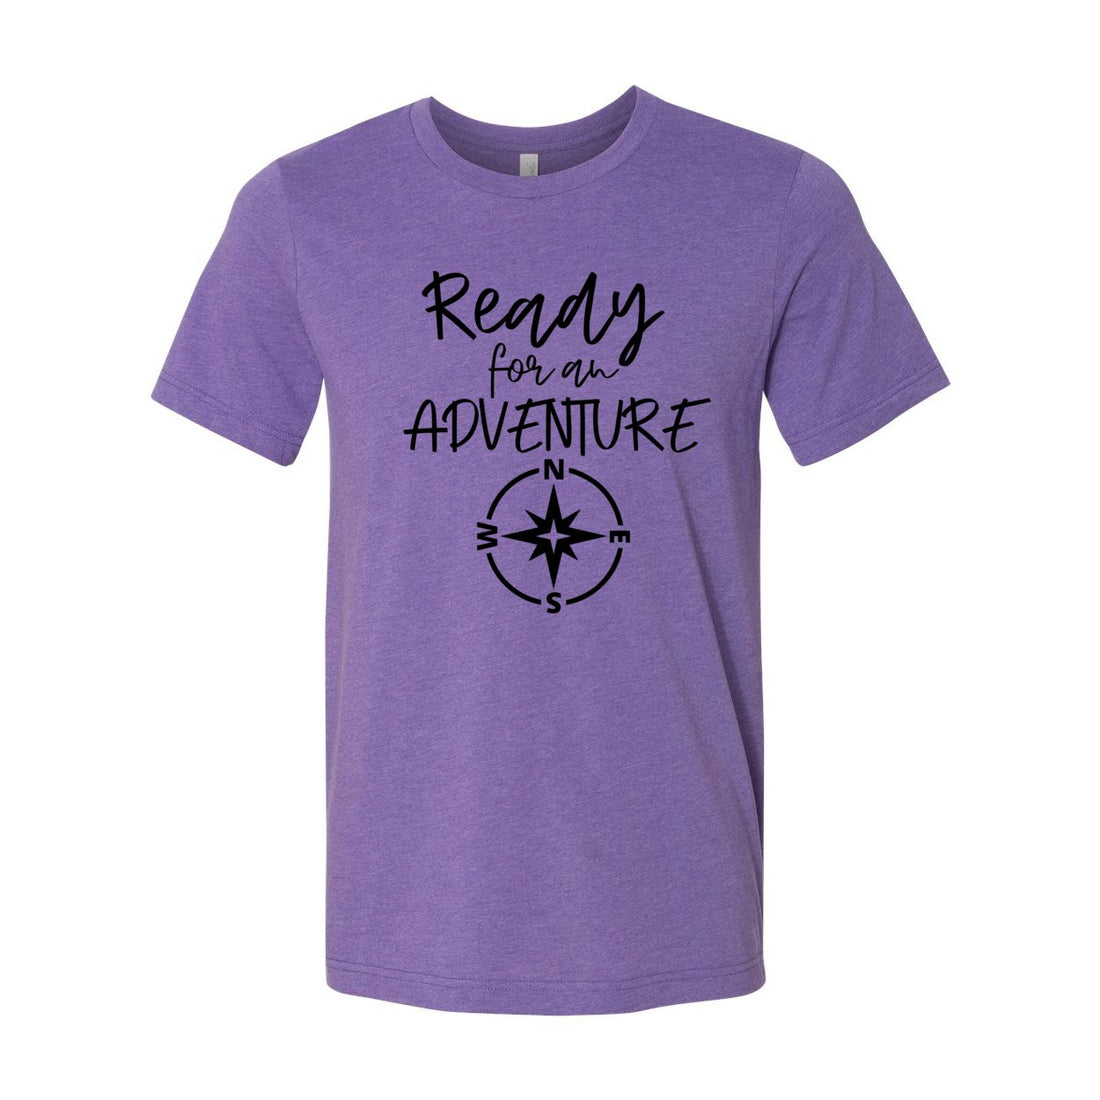 Ready For Adventure Sleeve Jersey Tee - T-Shirts - Positively Sassy - Ready For Adventure Sleeve Jersey Tee